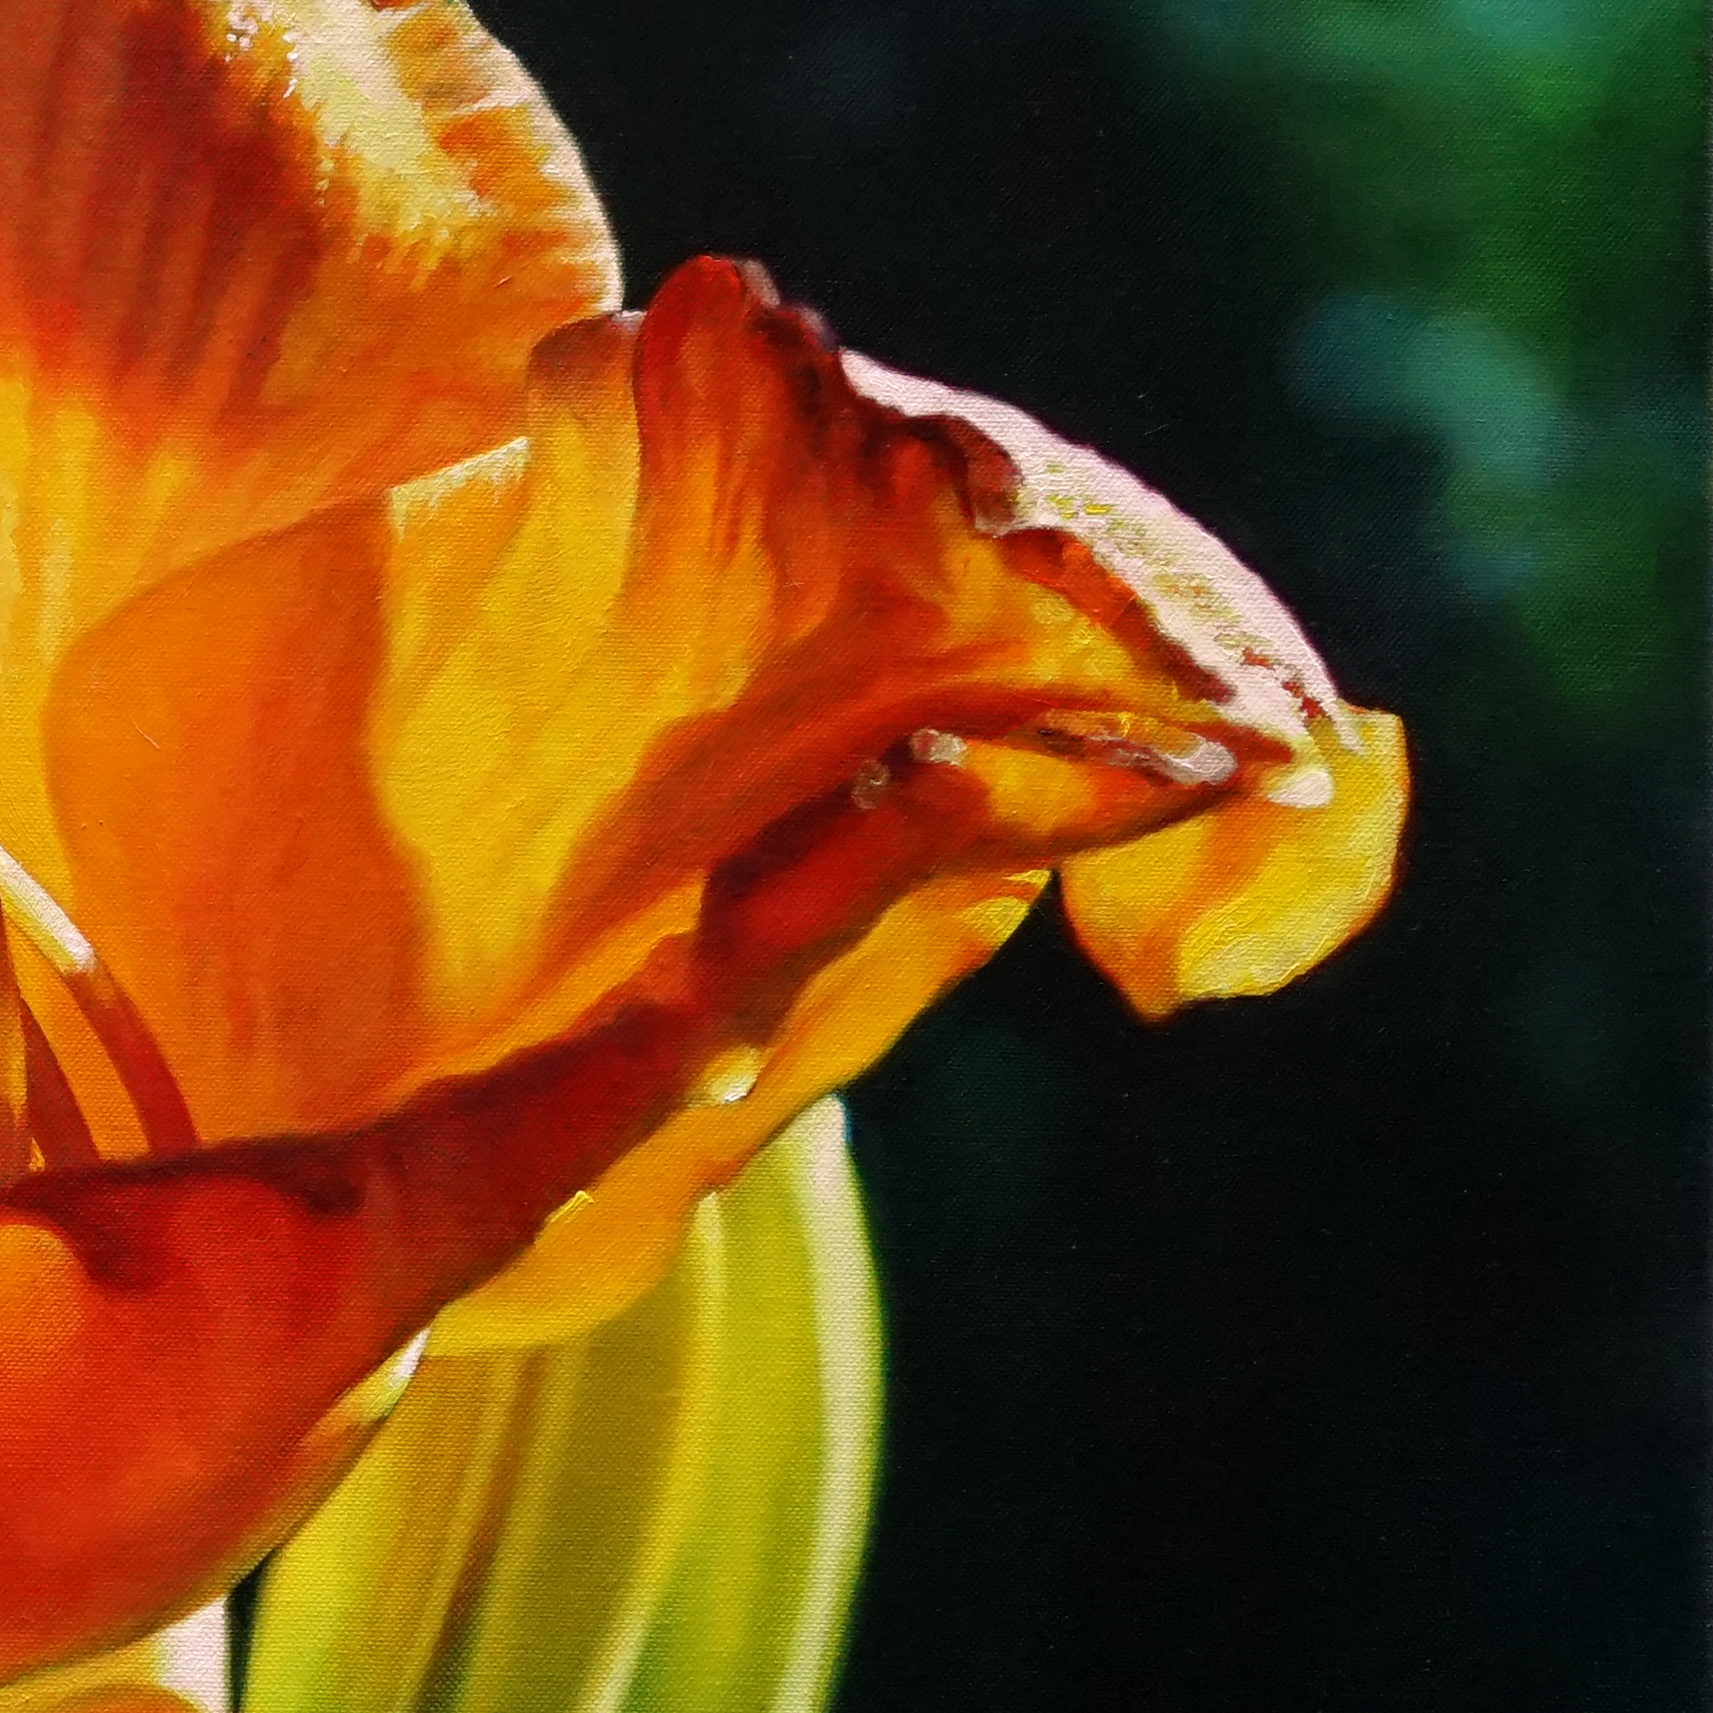 Still life with an orange lily. Painting, photorealism. Artist Anna Grechina.